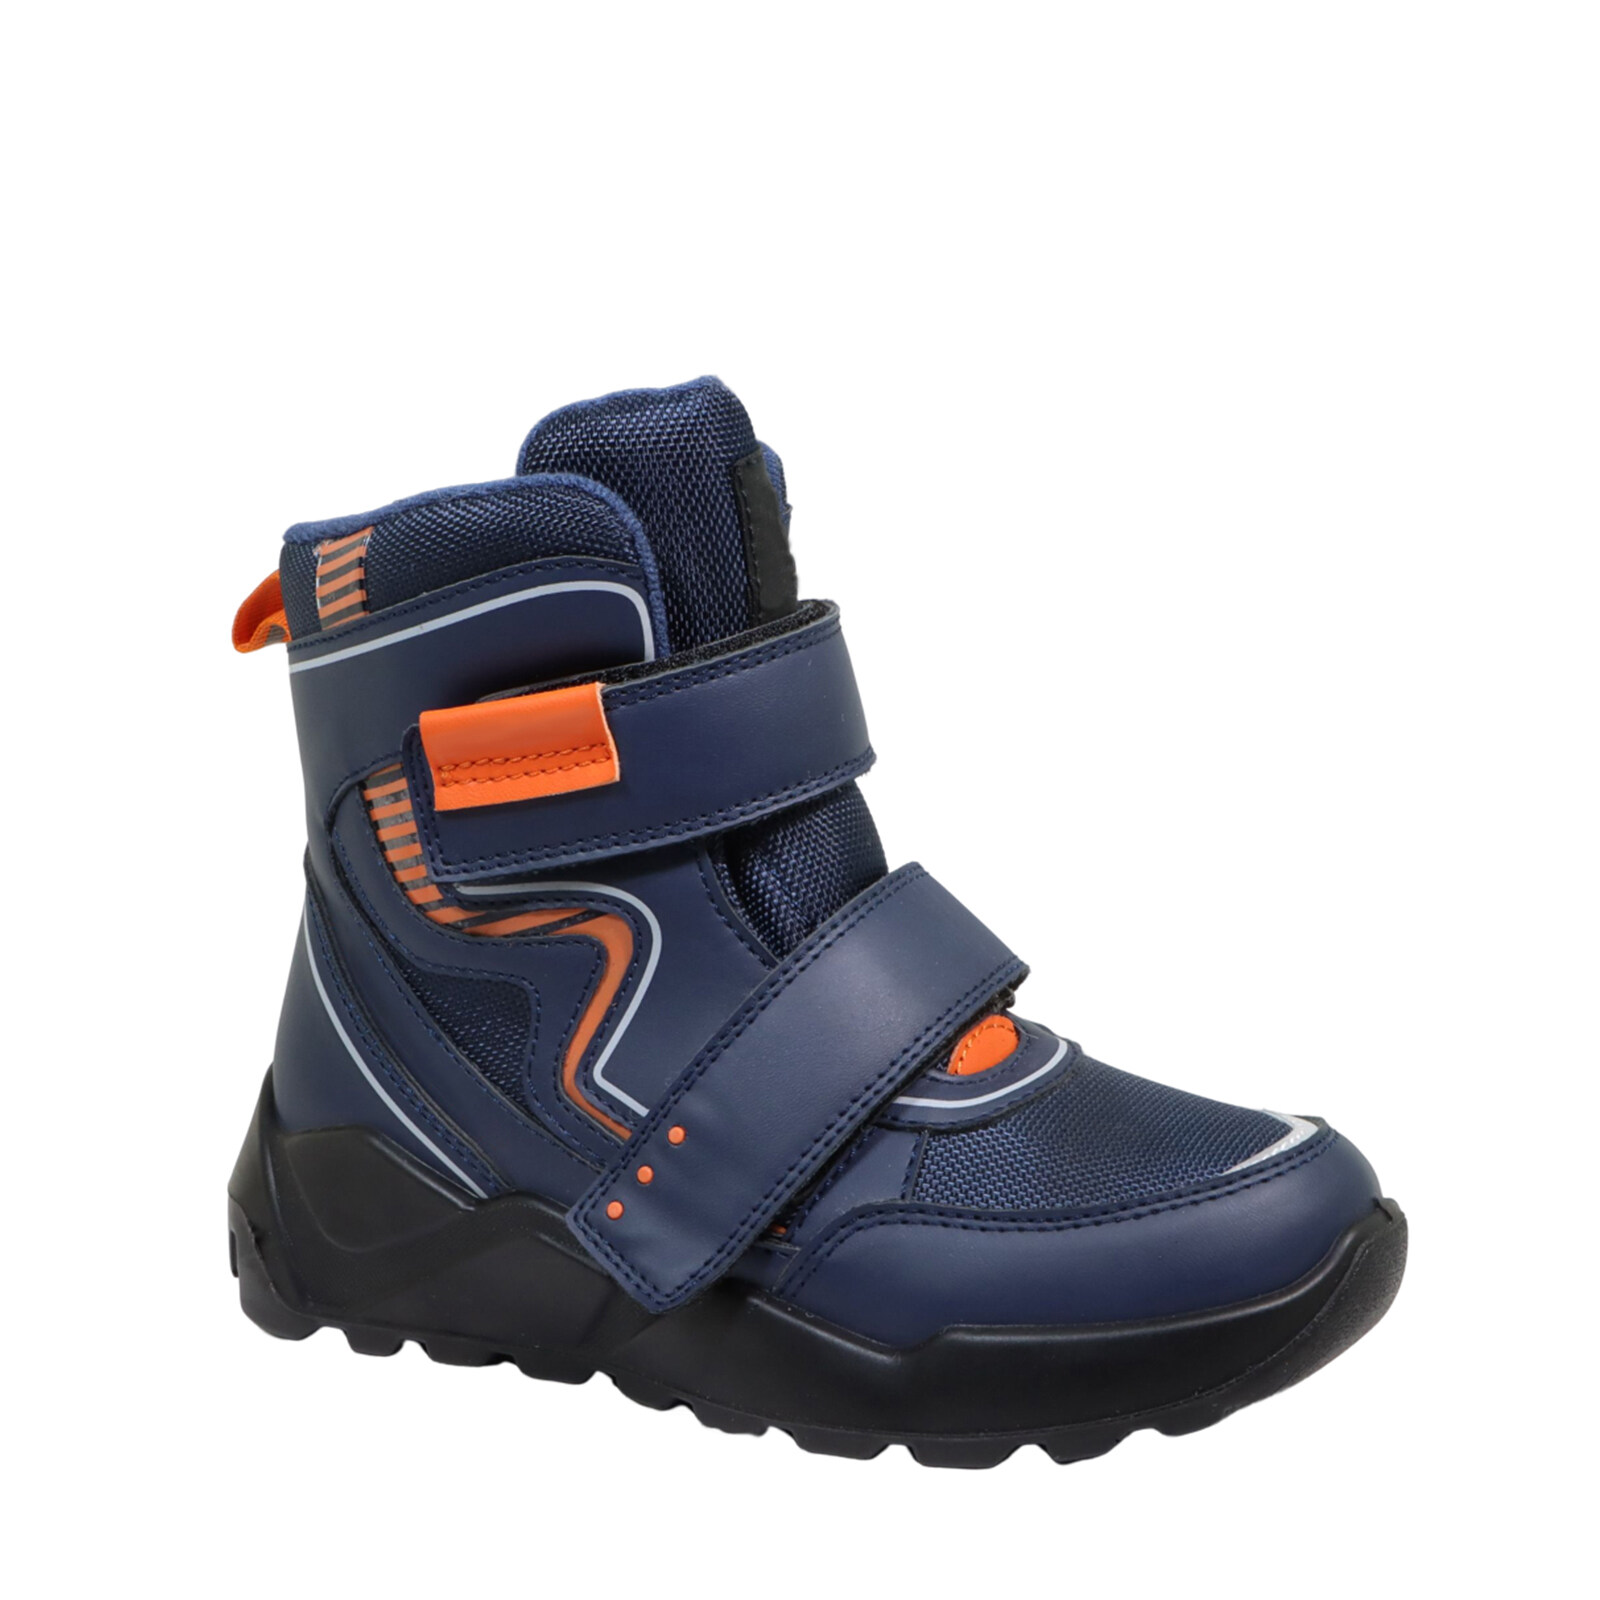 Top selling Fashion Snow Boots for children